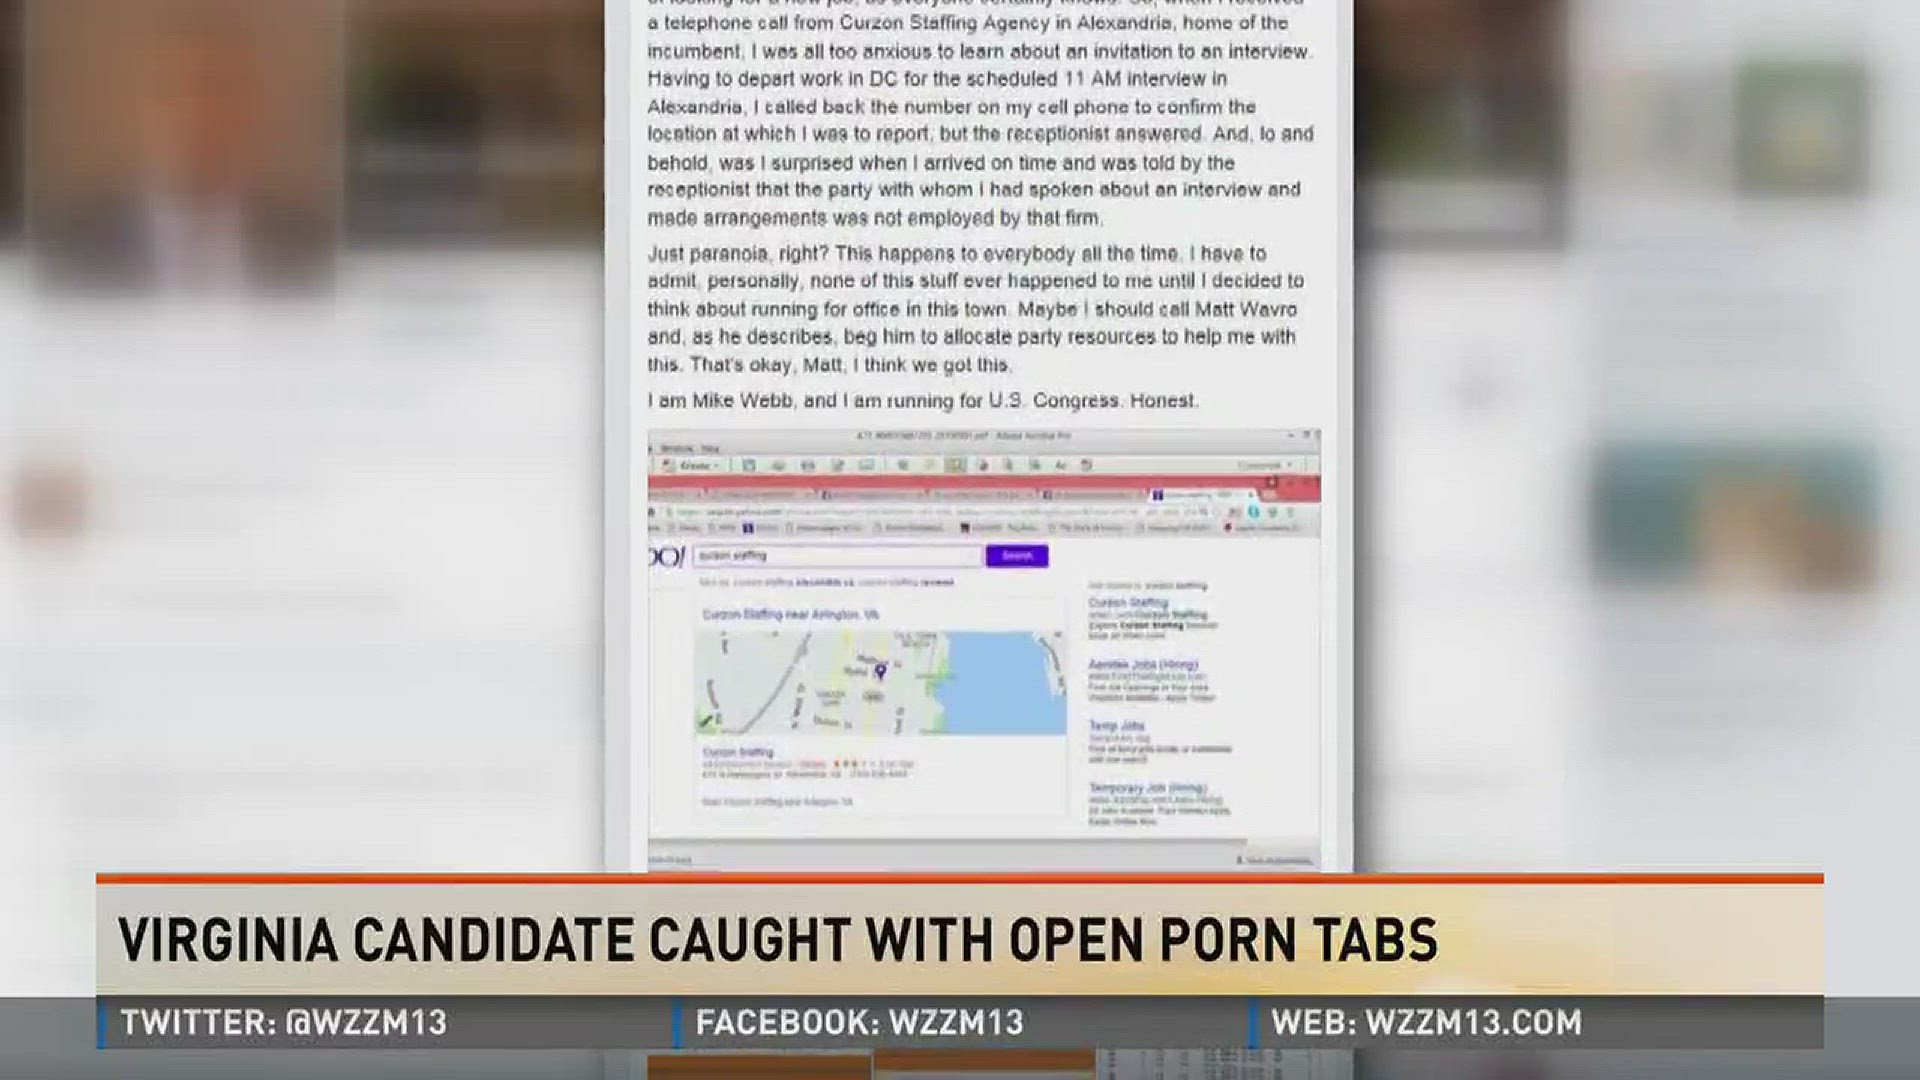 Free Beer and Hot Wings Congressional candidate shares porn sites on Facebook wzzm13